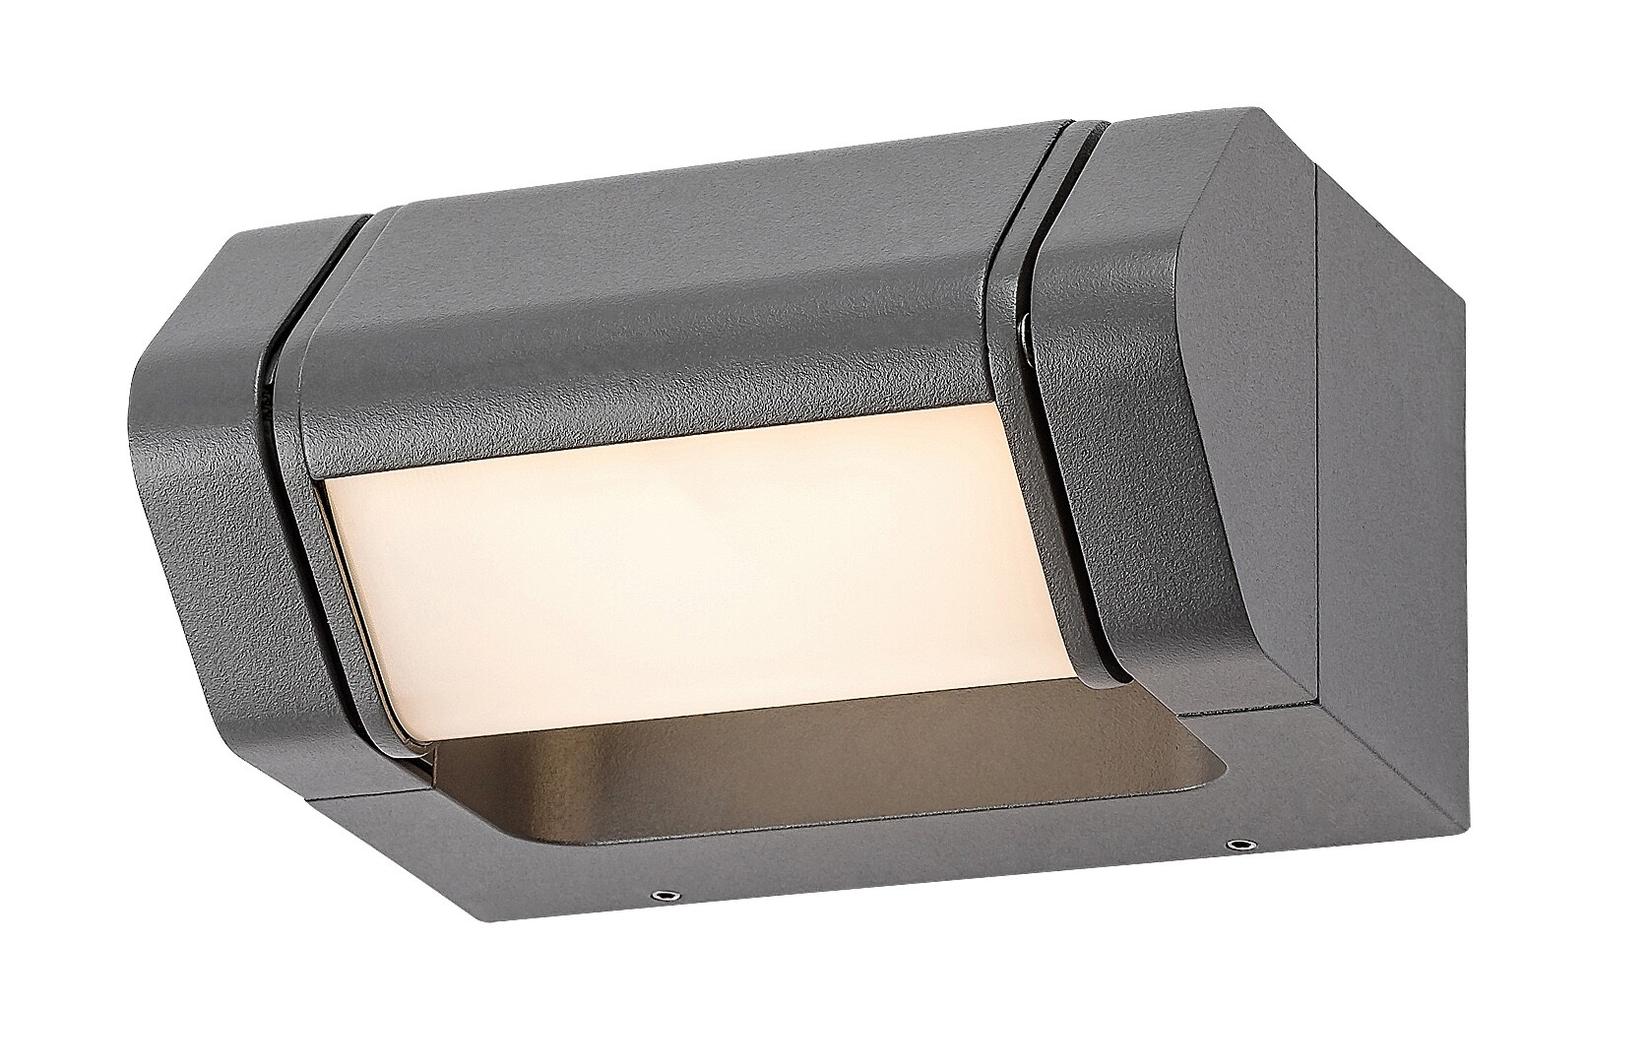 Selected image for RABALUX Medna Spoljna zidna lampa, LED, IP54, 8W, 530lm, Antracit